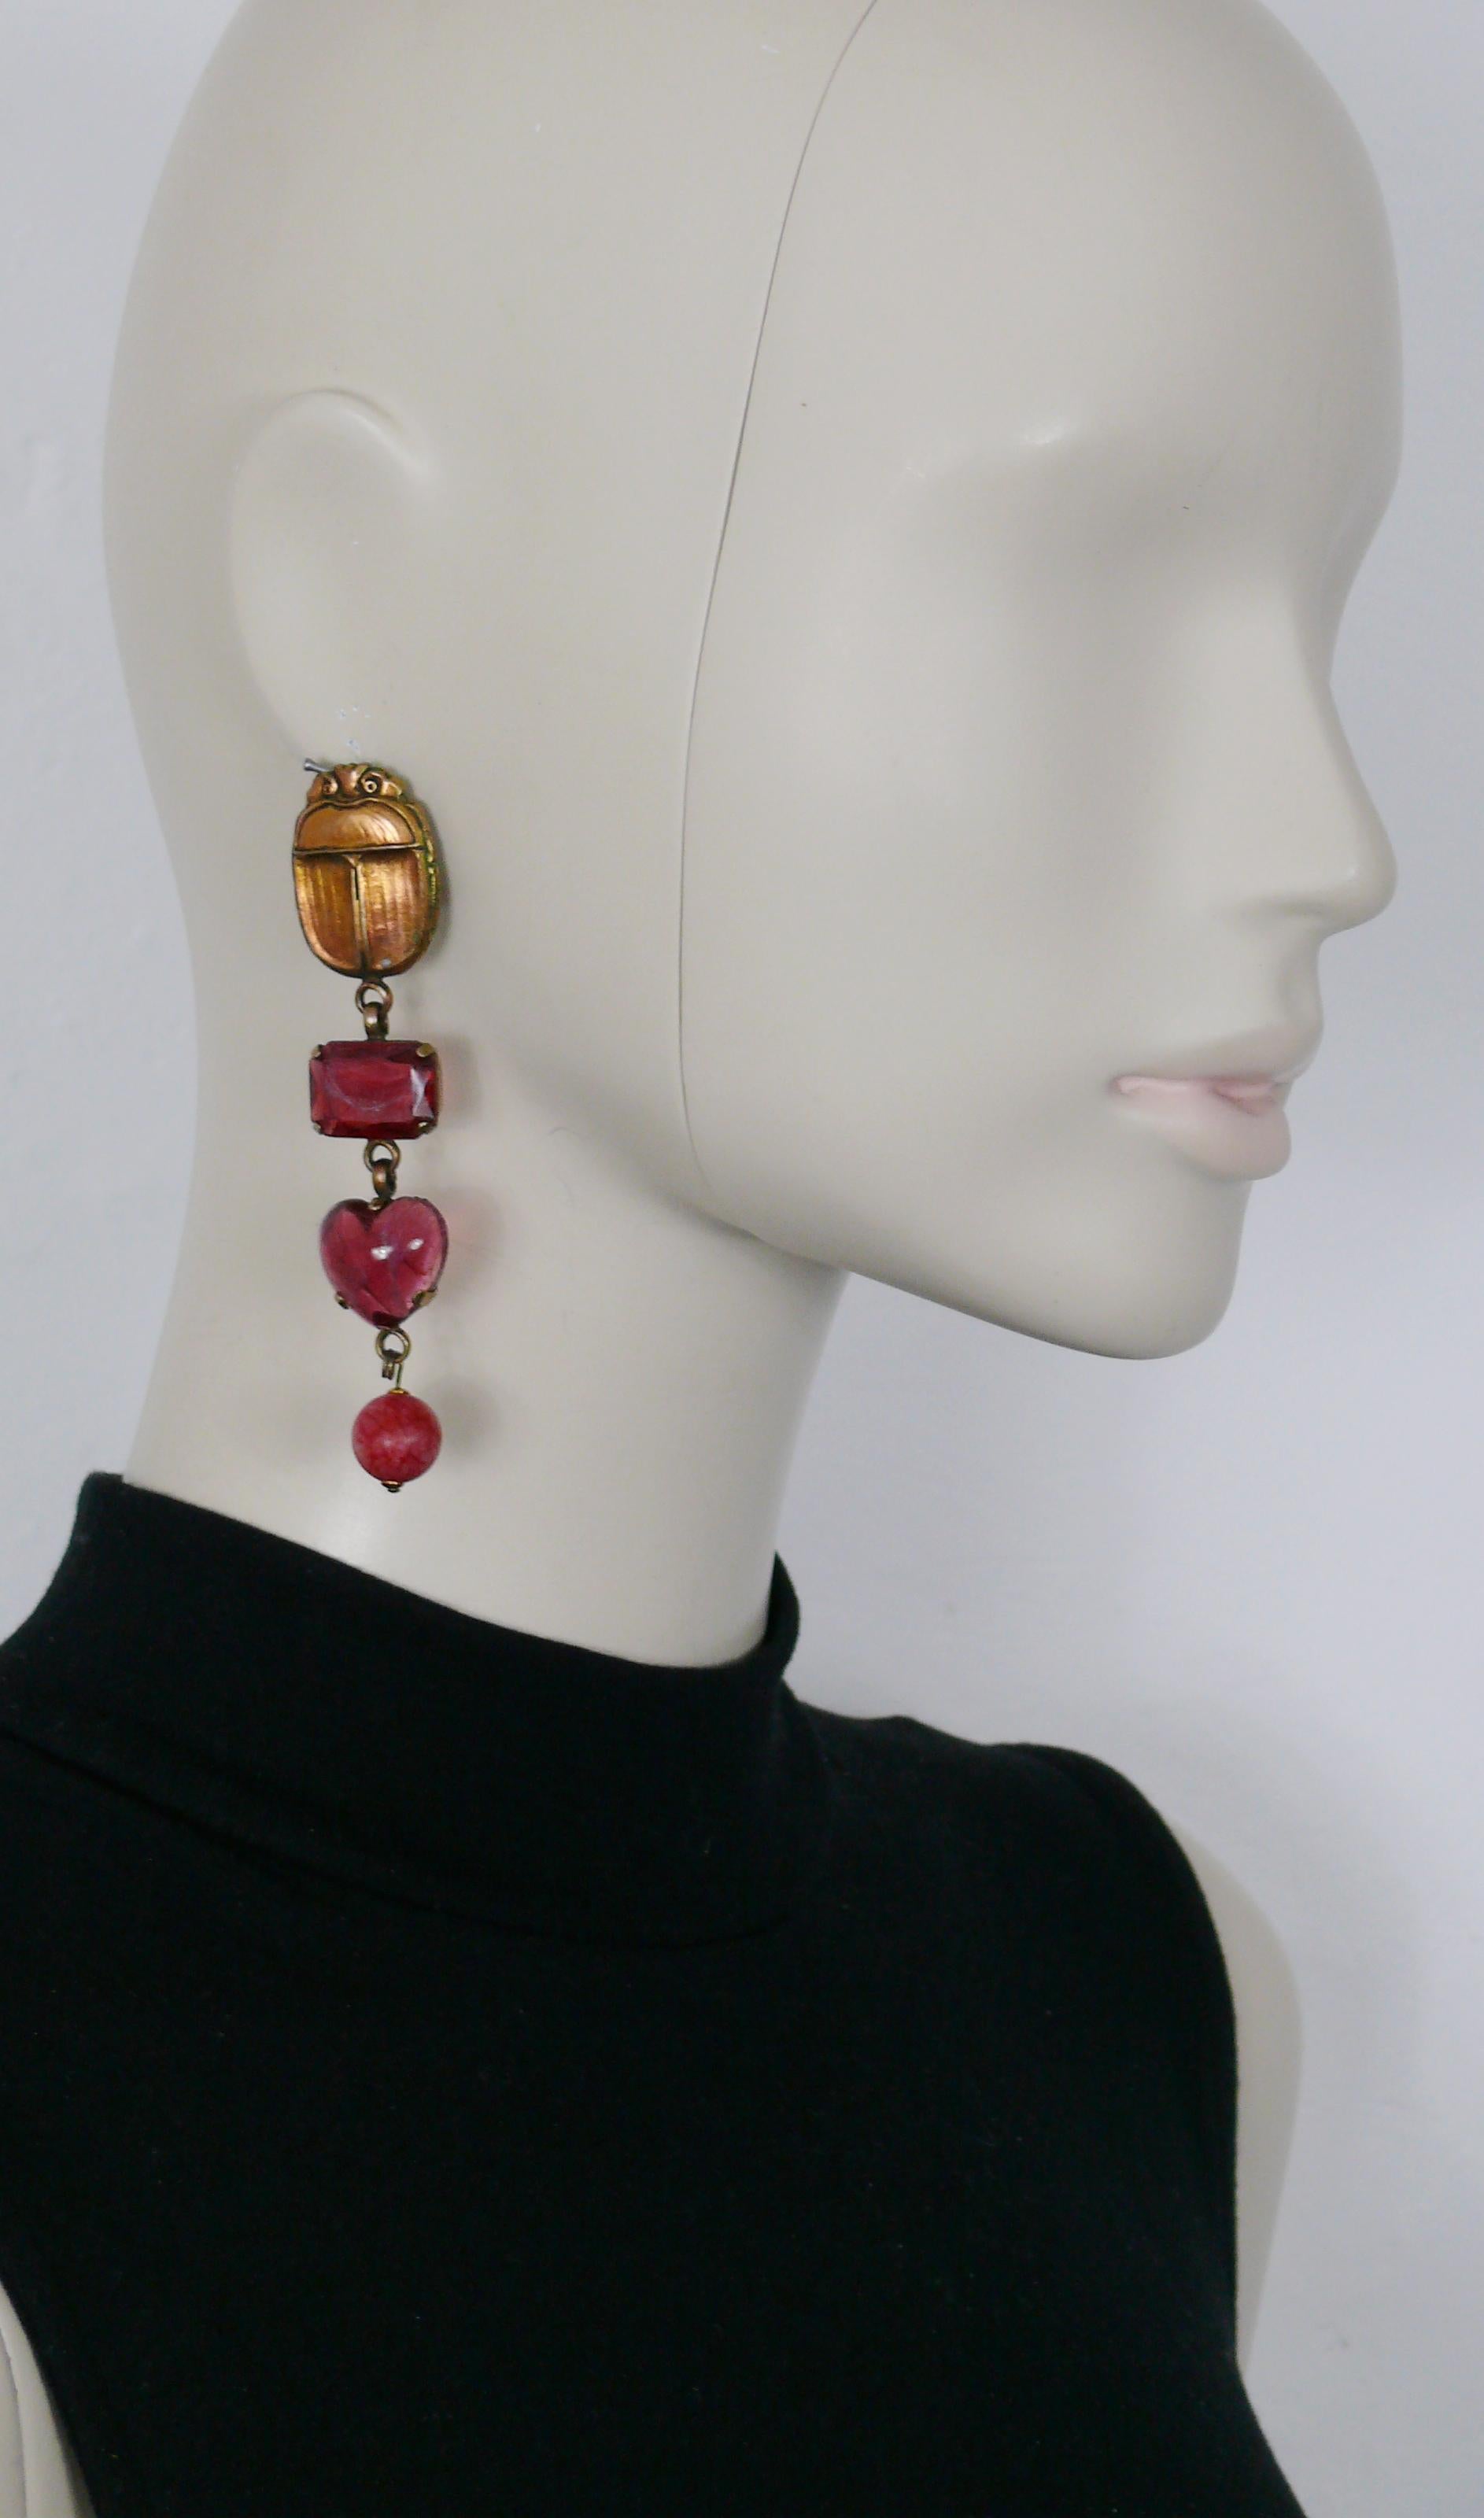 ZOE COSTE vintage antiqued bronze toned dangling earrings (clip-on) featuring a scarab top, marbled red resin cabochons and a pink marbled drop ball.

Embossed ZOE COSTE Made in France.

Indicative measurements : height approx. 9 cm (3.54 inches) /